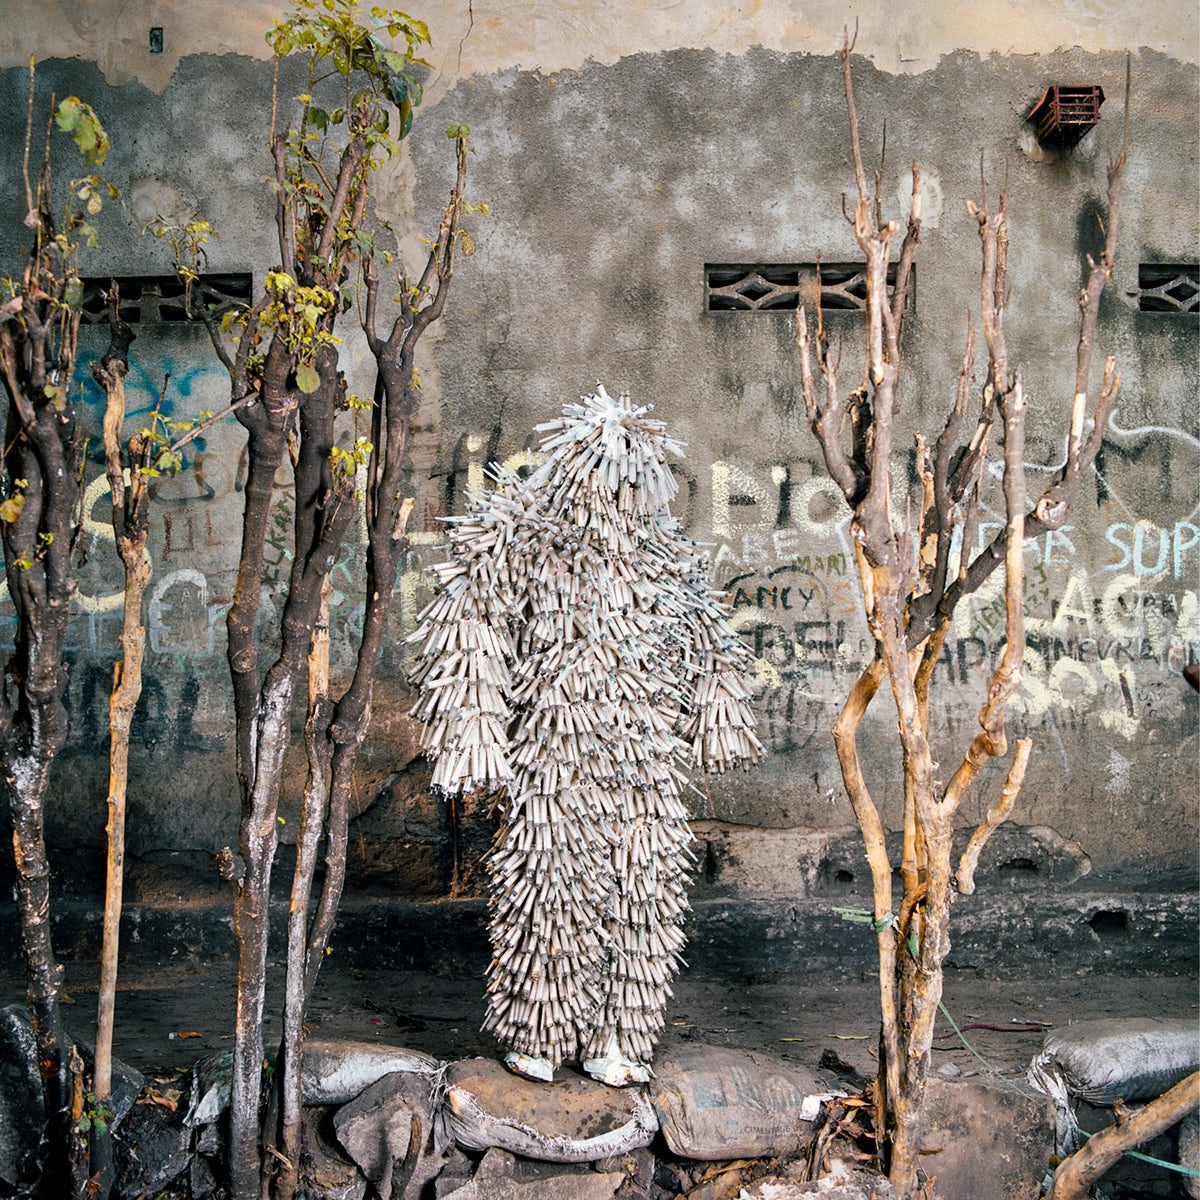 Photo by Colin Delfosse showing a person wearing a costume created from waste that has the appearance of metallic feathers, stood next to bare trees and a graffiti covered wall